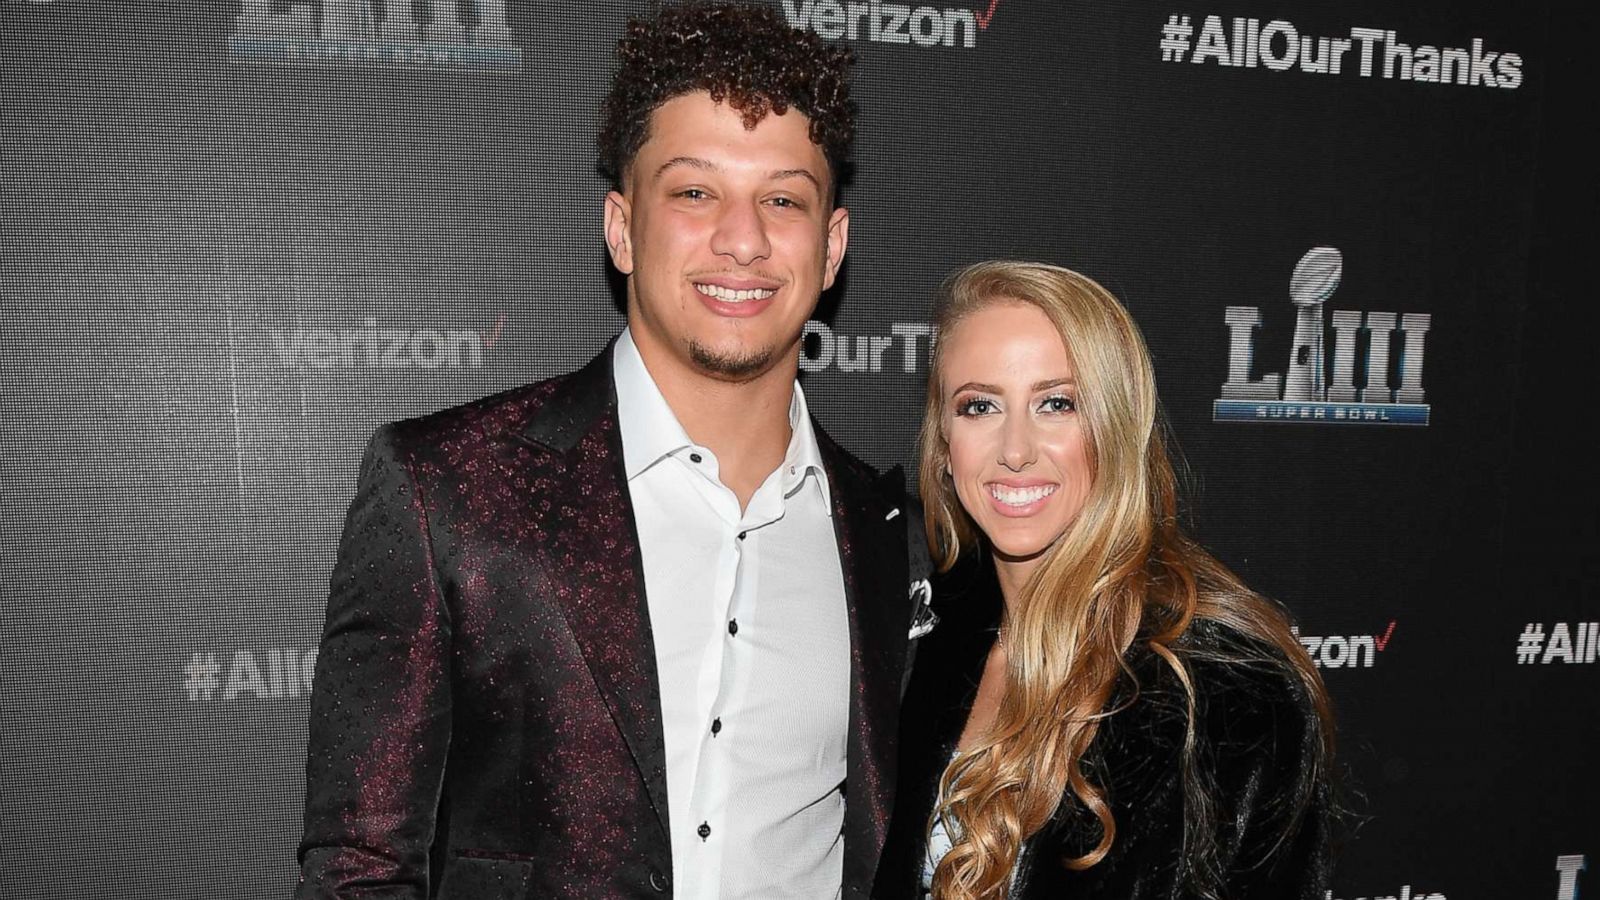 This is how Brittany Mahomes and family got ready for Patrick